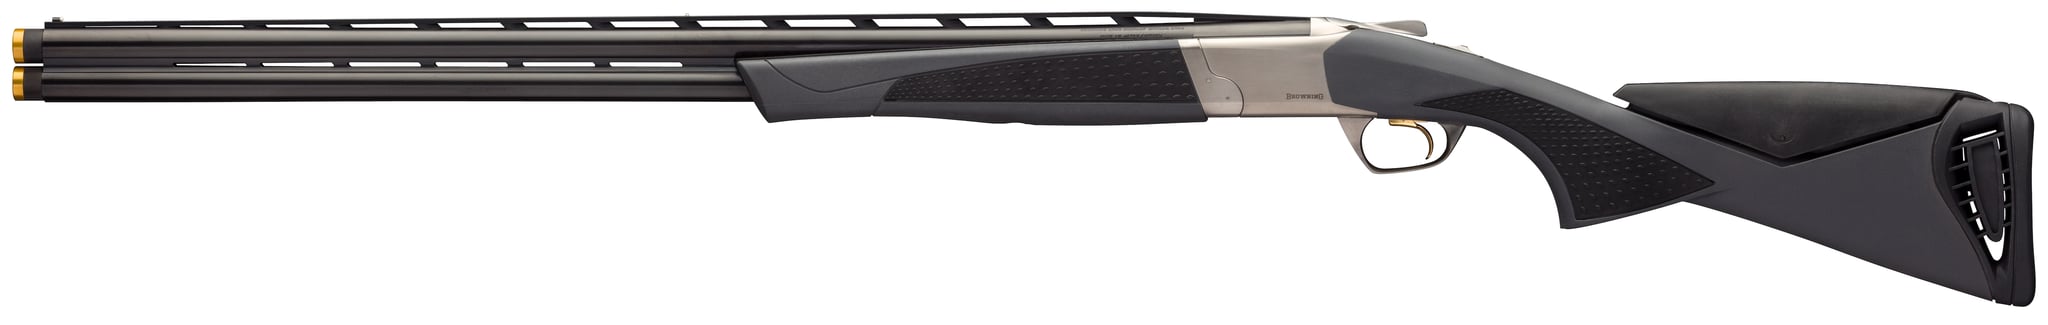 The Cynergy CX Composite Charcoal model is one of two new models in the over and under shotgun series. (Photo: Browning)